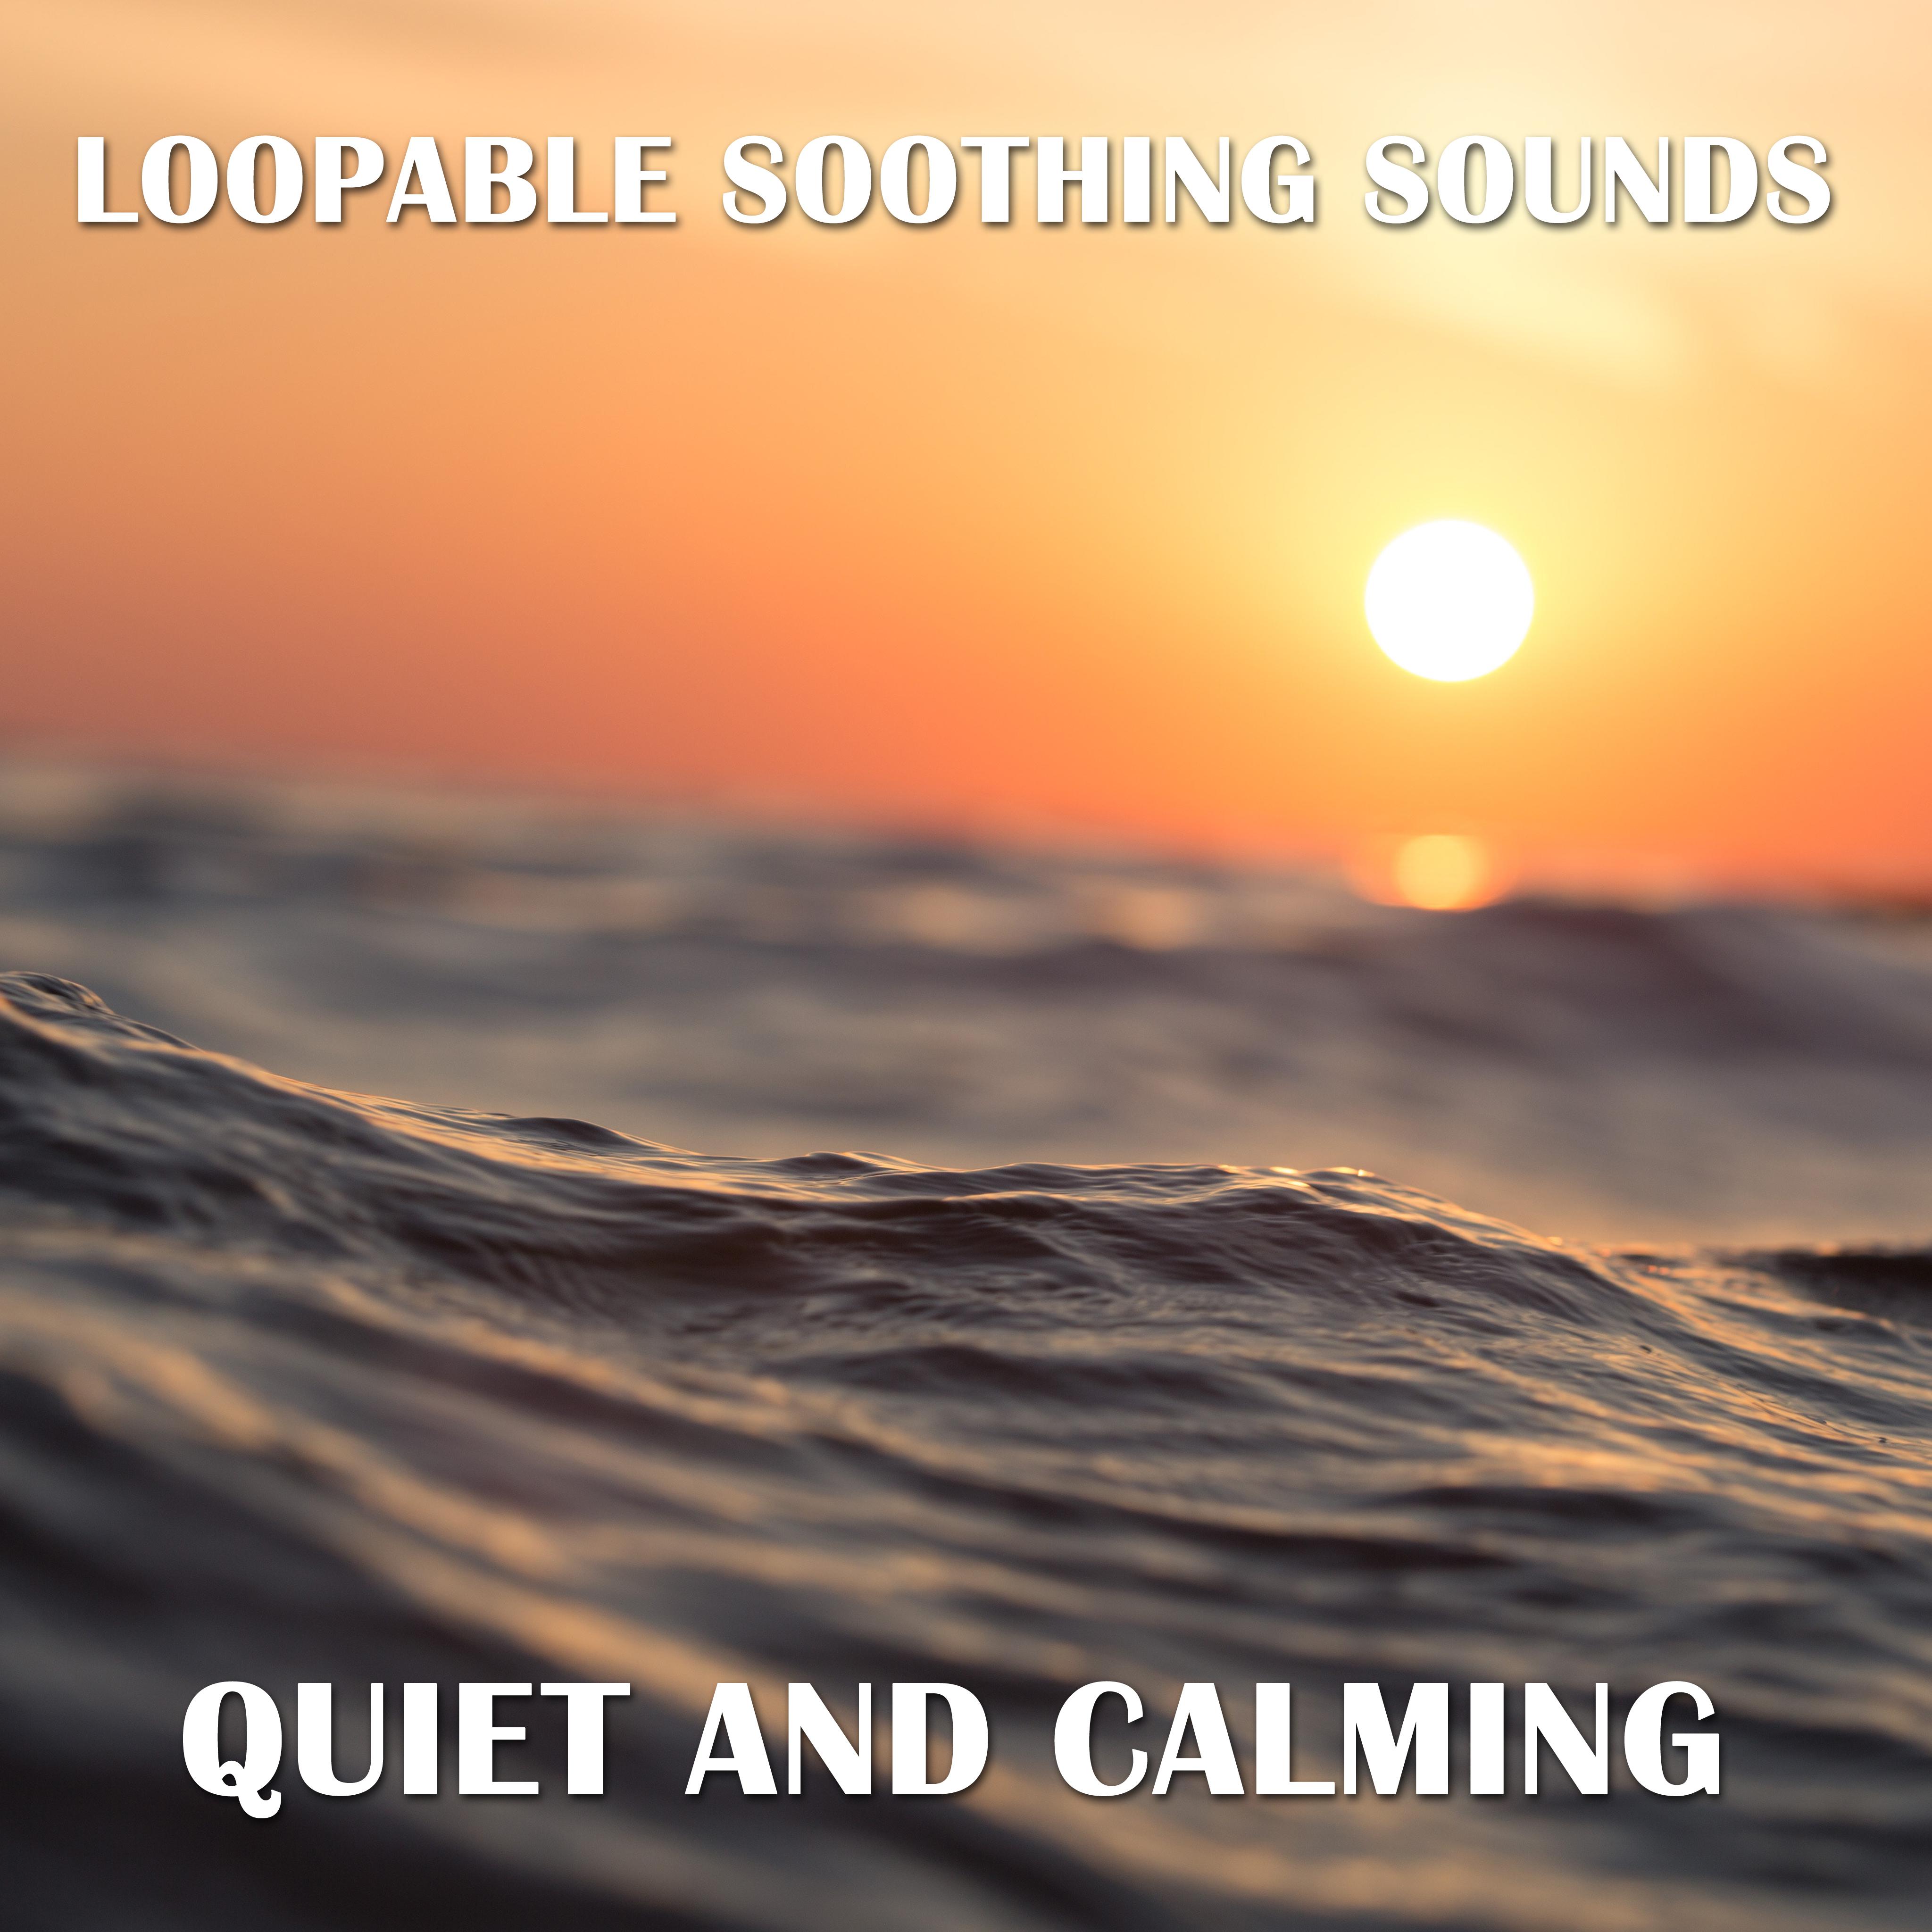 10 Loopable Soothing Sounds, Quiet and Calming